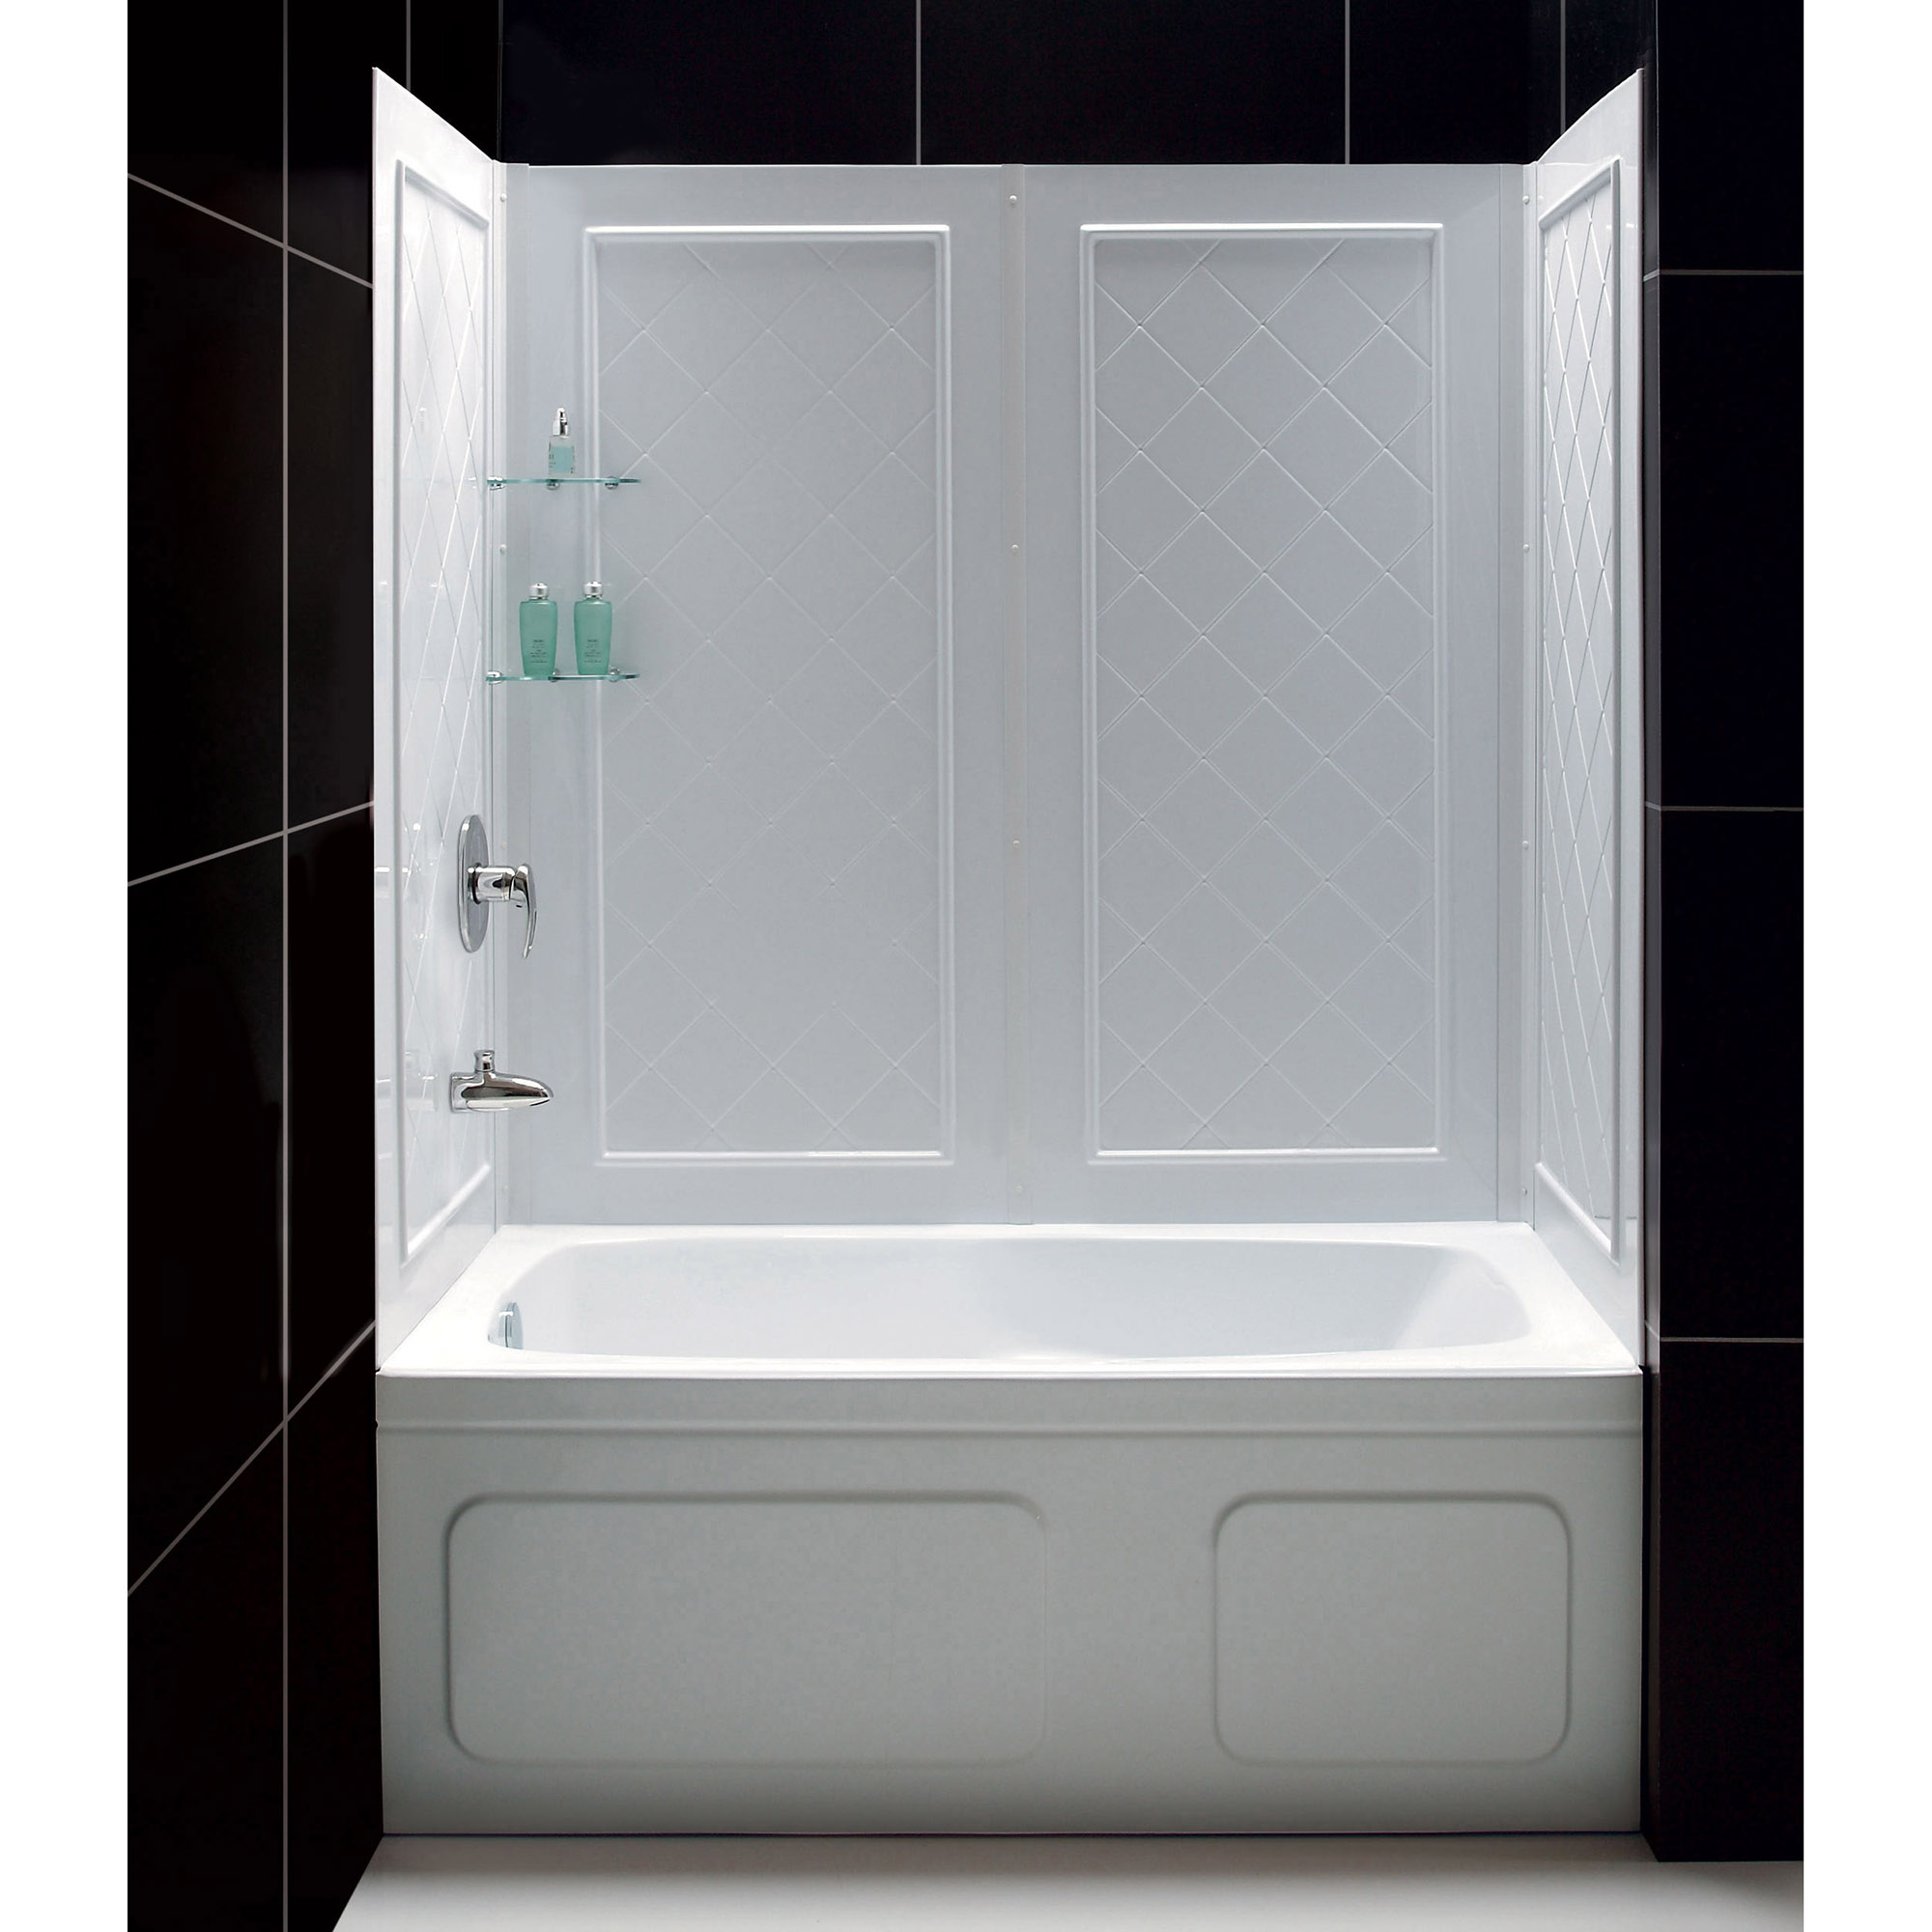 DreamLine Infinity-Z 56-60 in. W x 60 in. H Clear Sliding Tub Door in Brushed Nickel with White Acrylic Backwall Kit - image 11 of 14